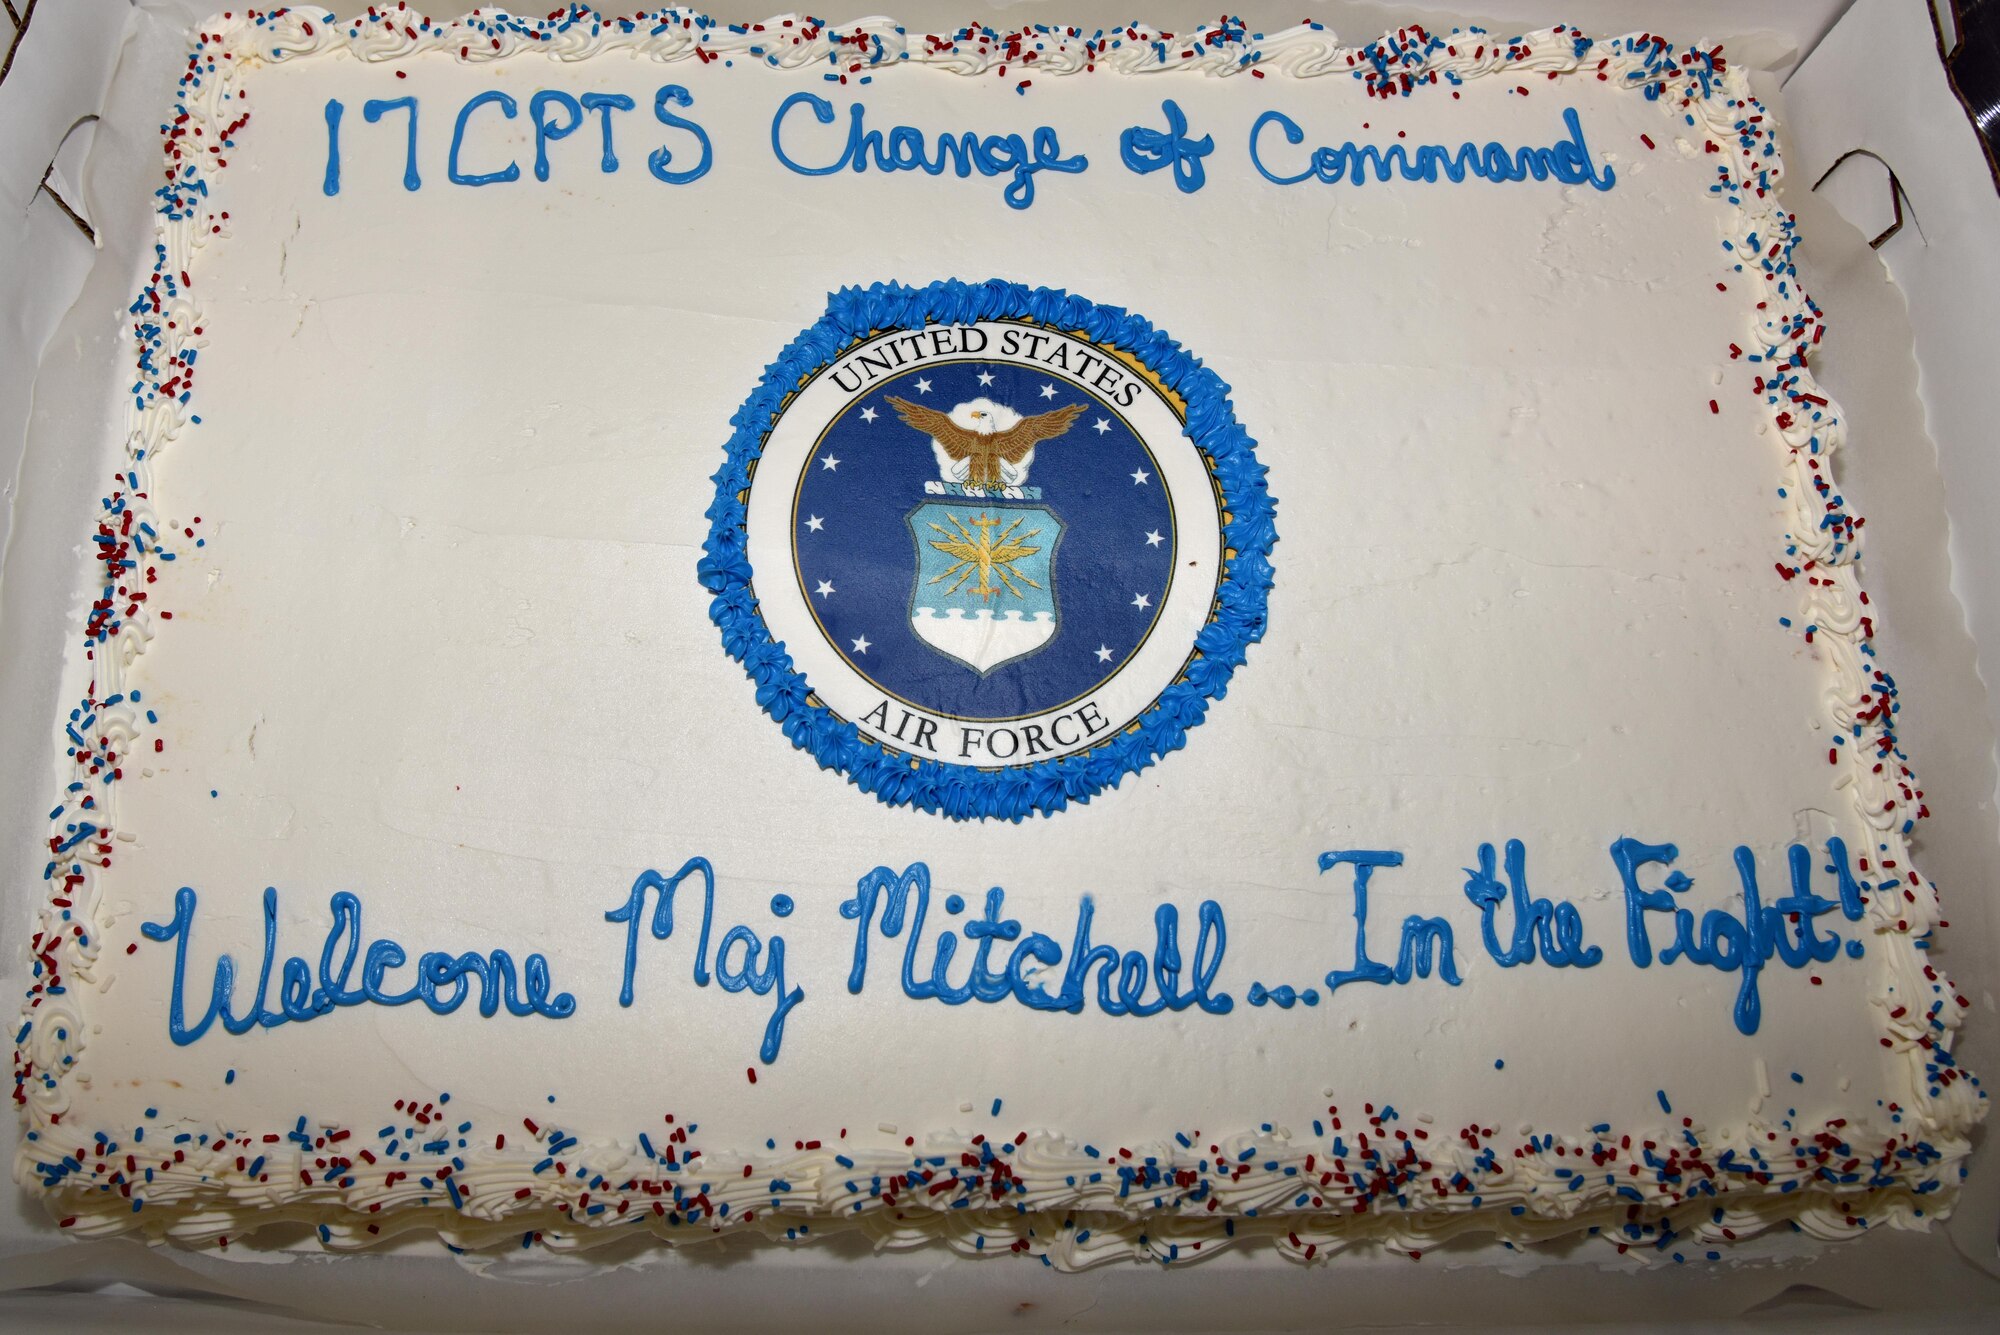 A decorated cake sits on display during the 17th Comptroller Change of Command ceremony at the Event Center on Goodfellow Air Force Base, Texas, June 2, 2017. The event welcomed its new commander Maj. Nelson Mitchell. (U.S. Air Force photo by Staff Sgt. Joshua Edwards/Released)